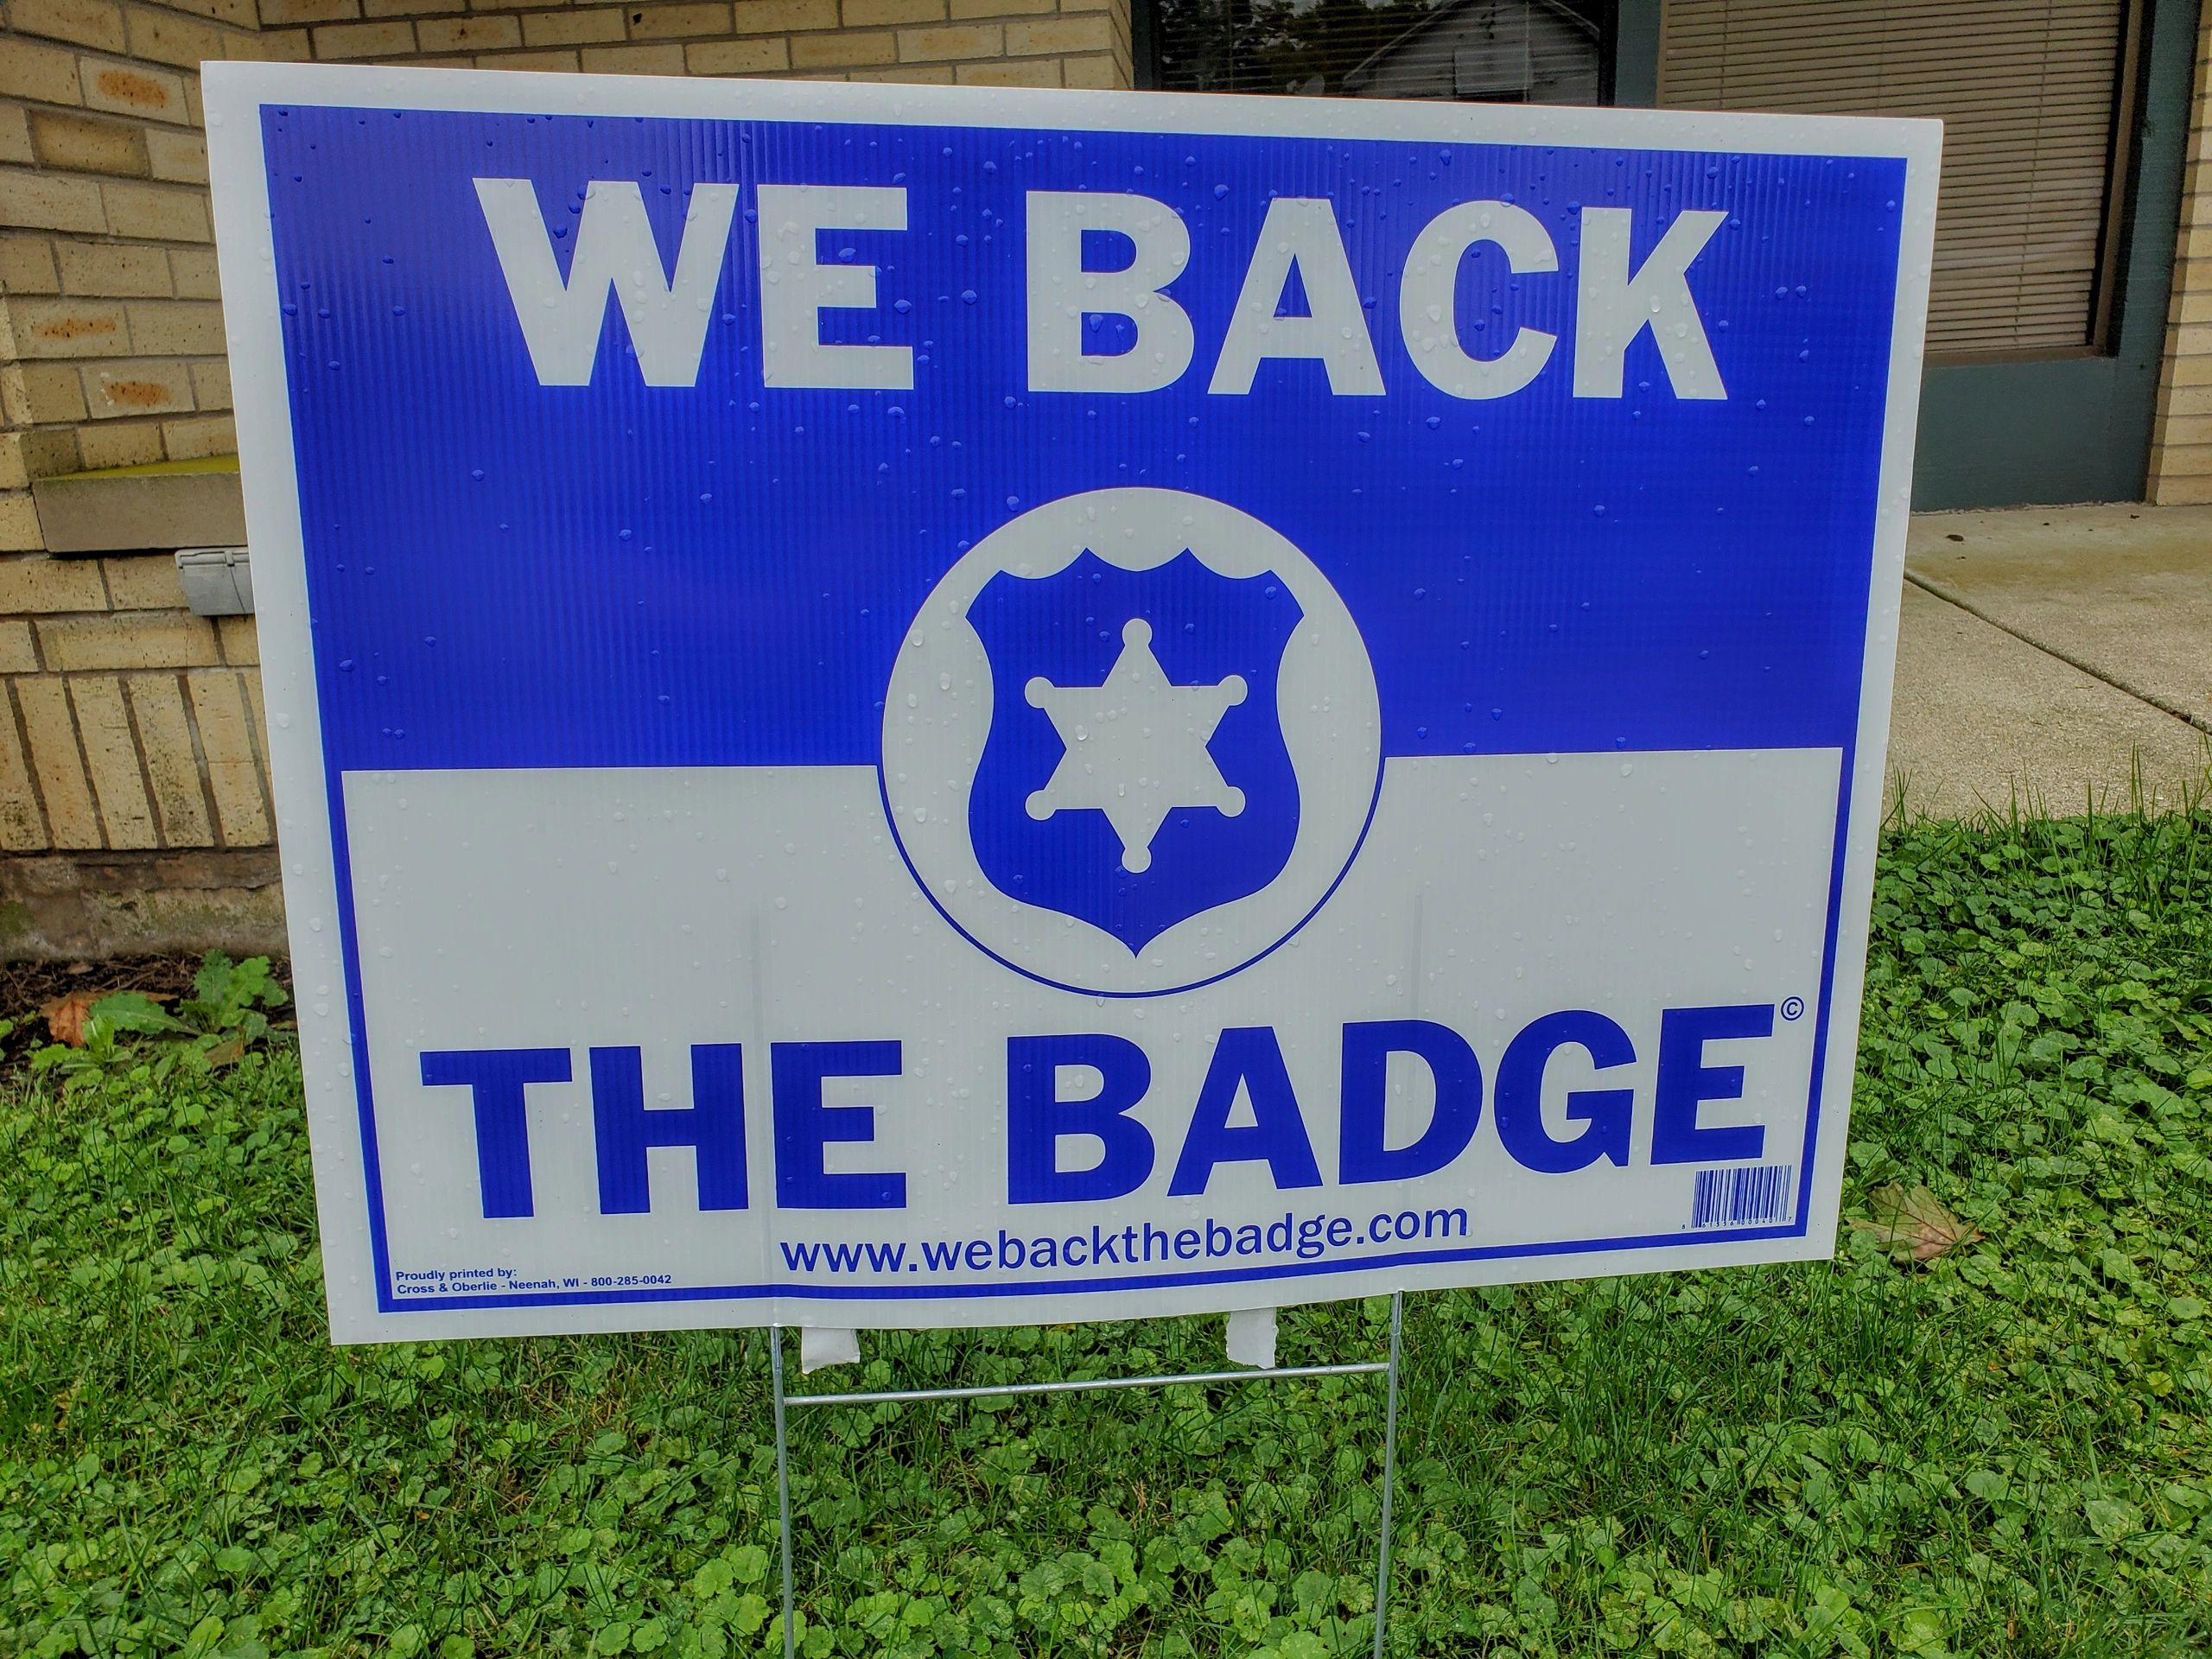 Show your support for our community's Law Enforcement Agency. A "We Back the Badge" lawn sign will l